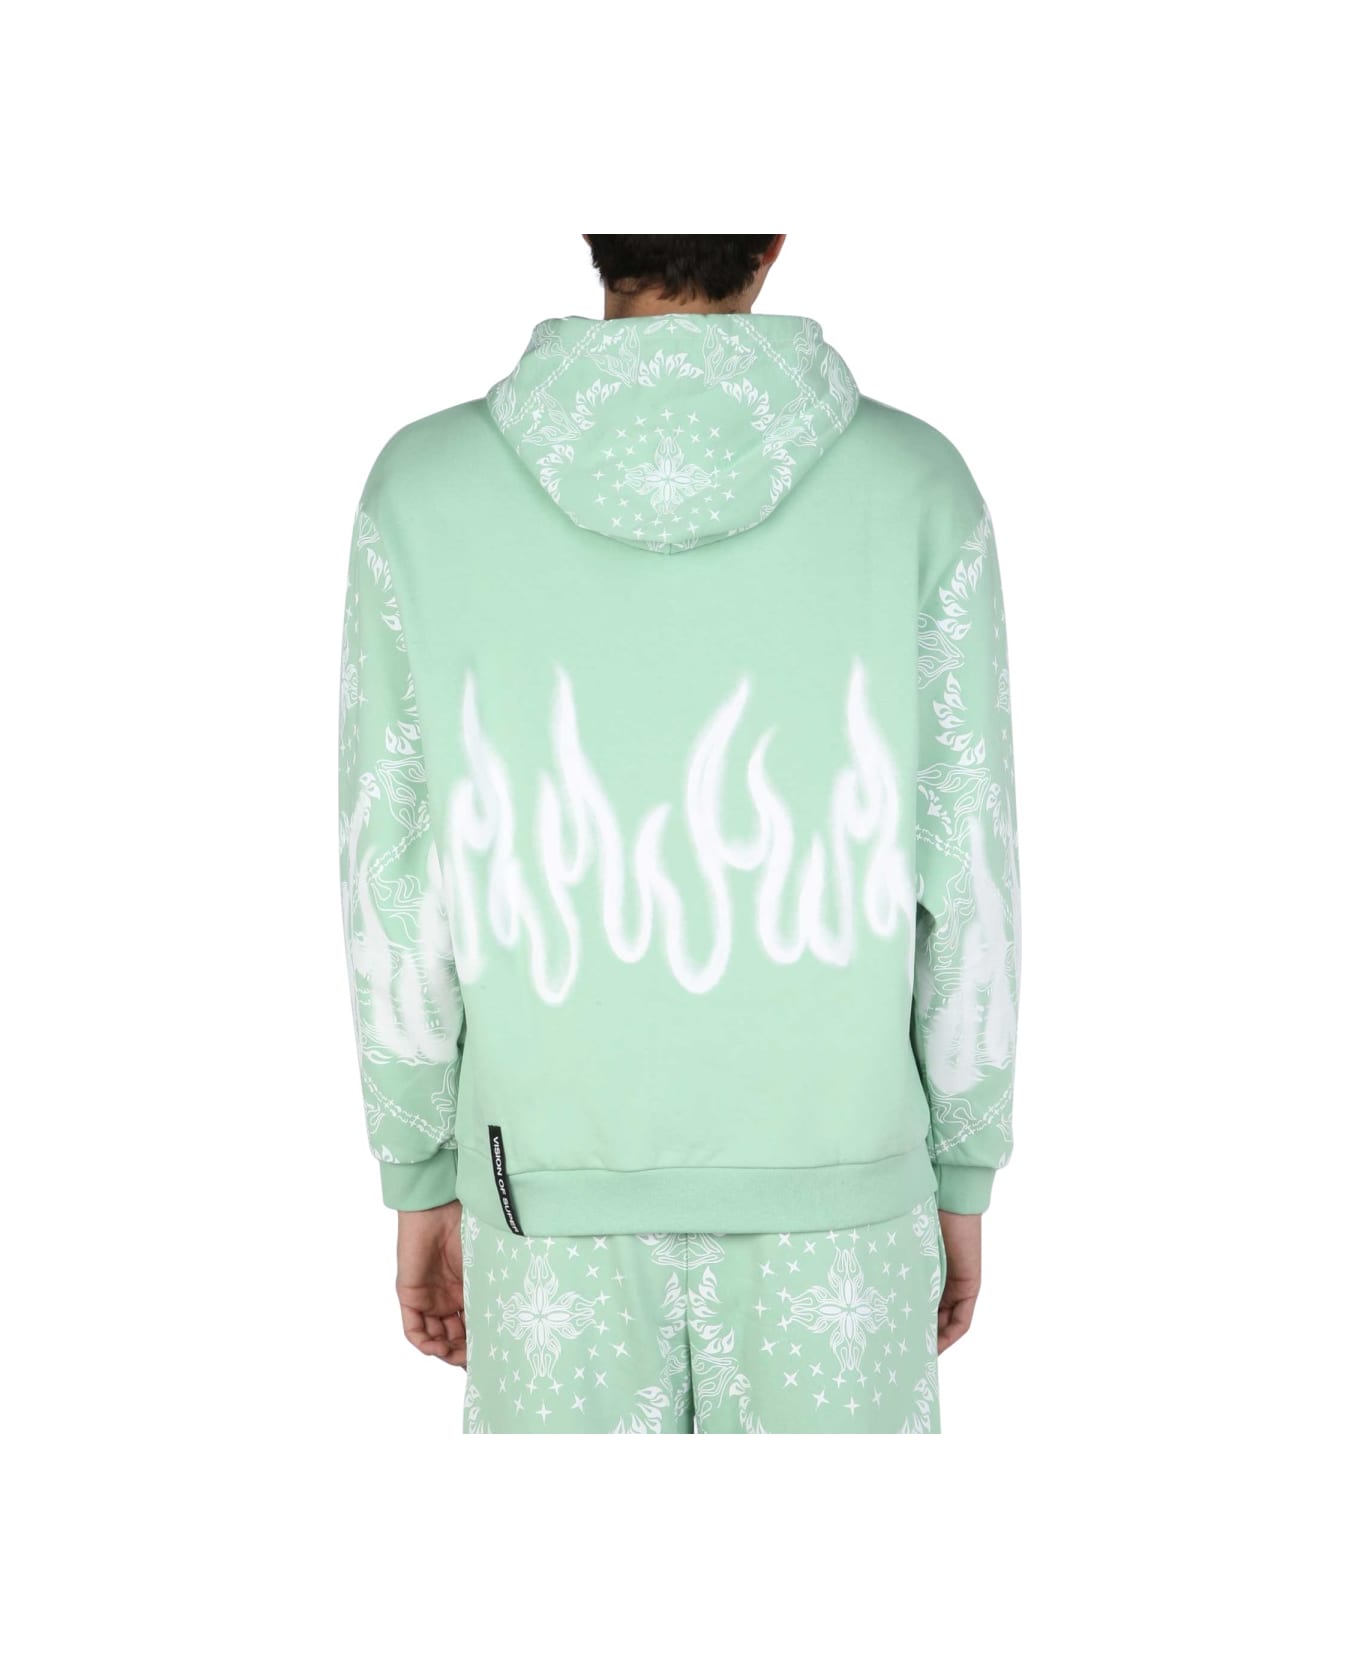 Vision of Super Sweatshirt With Paisley Pattern - GREEN